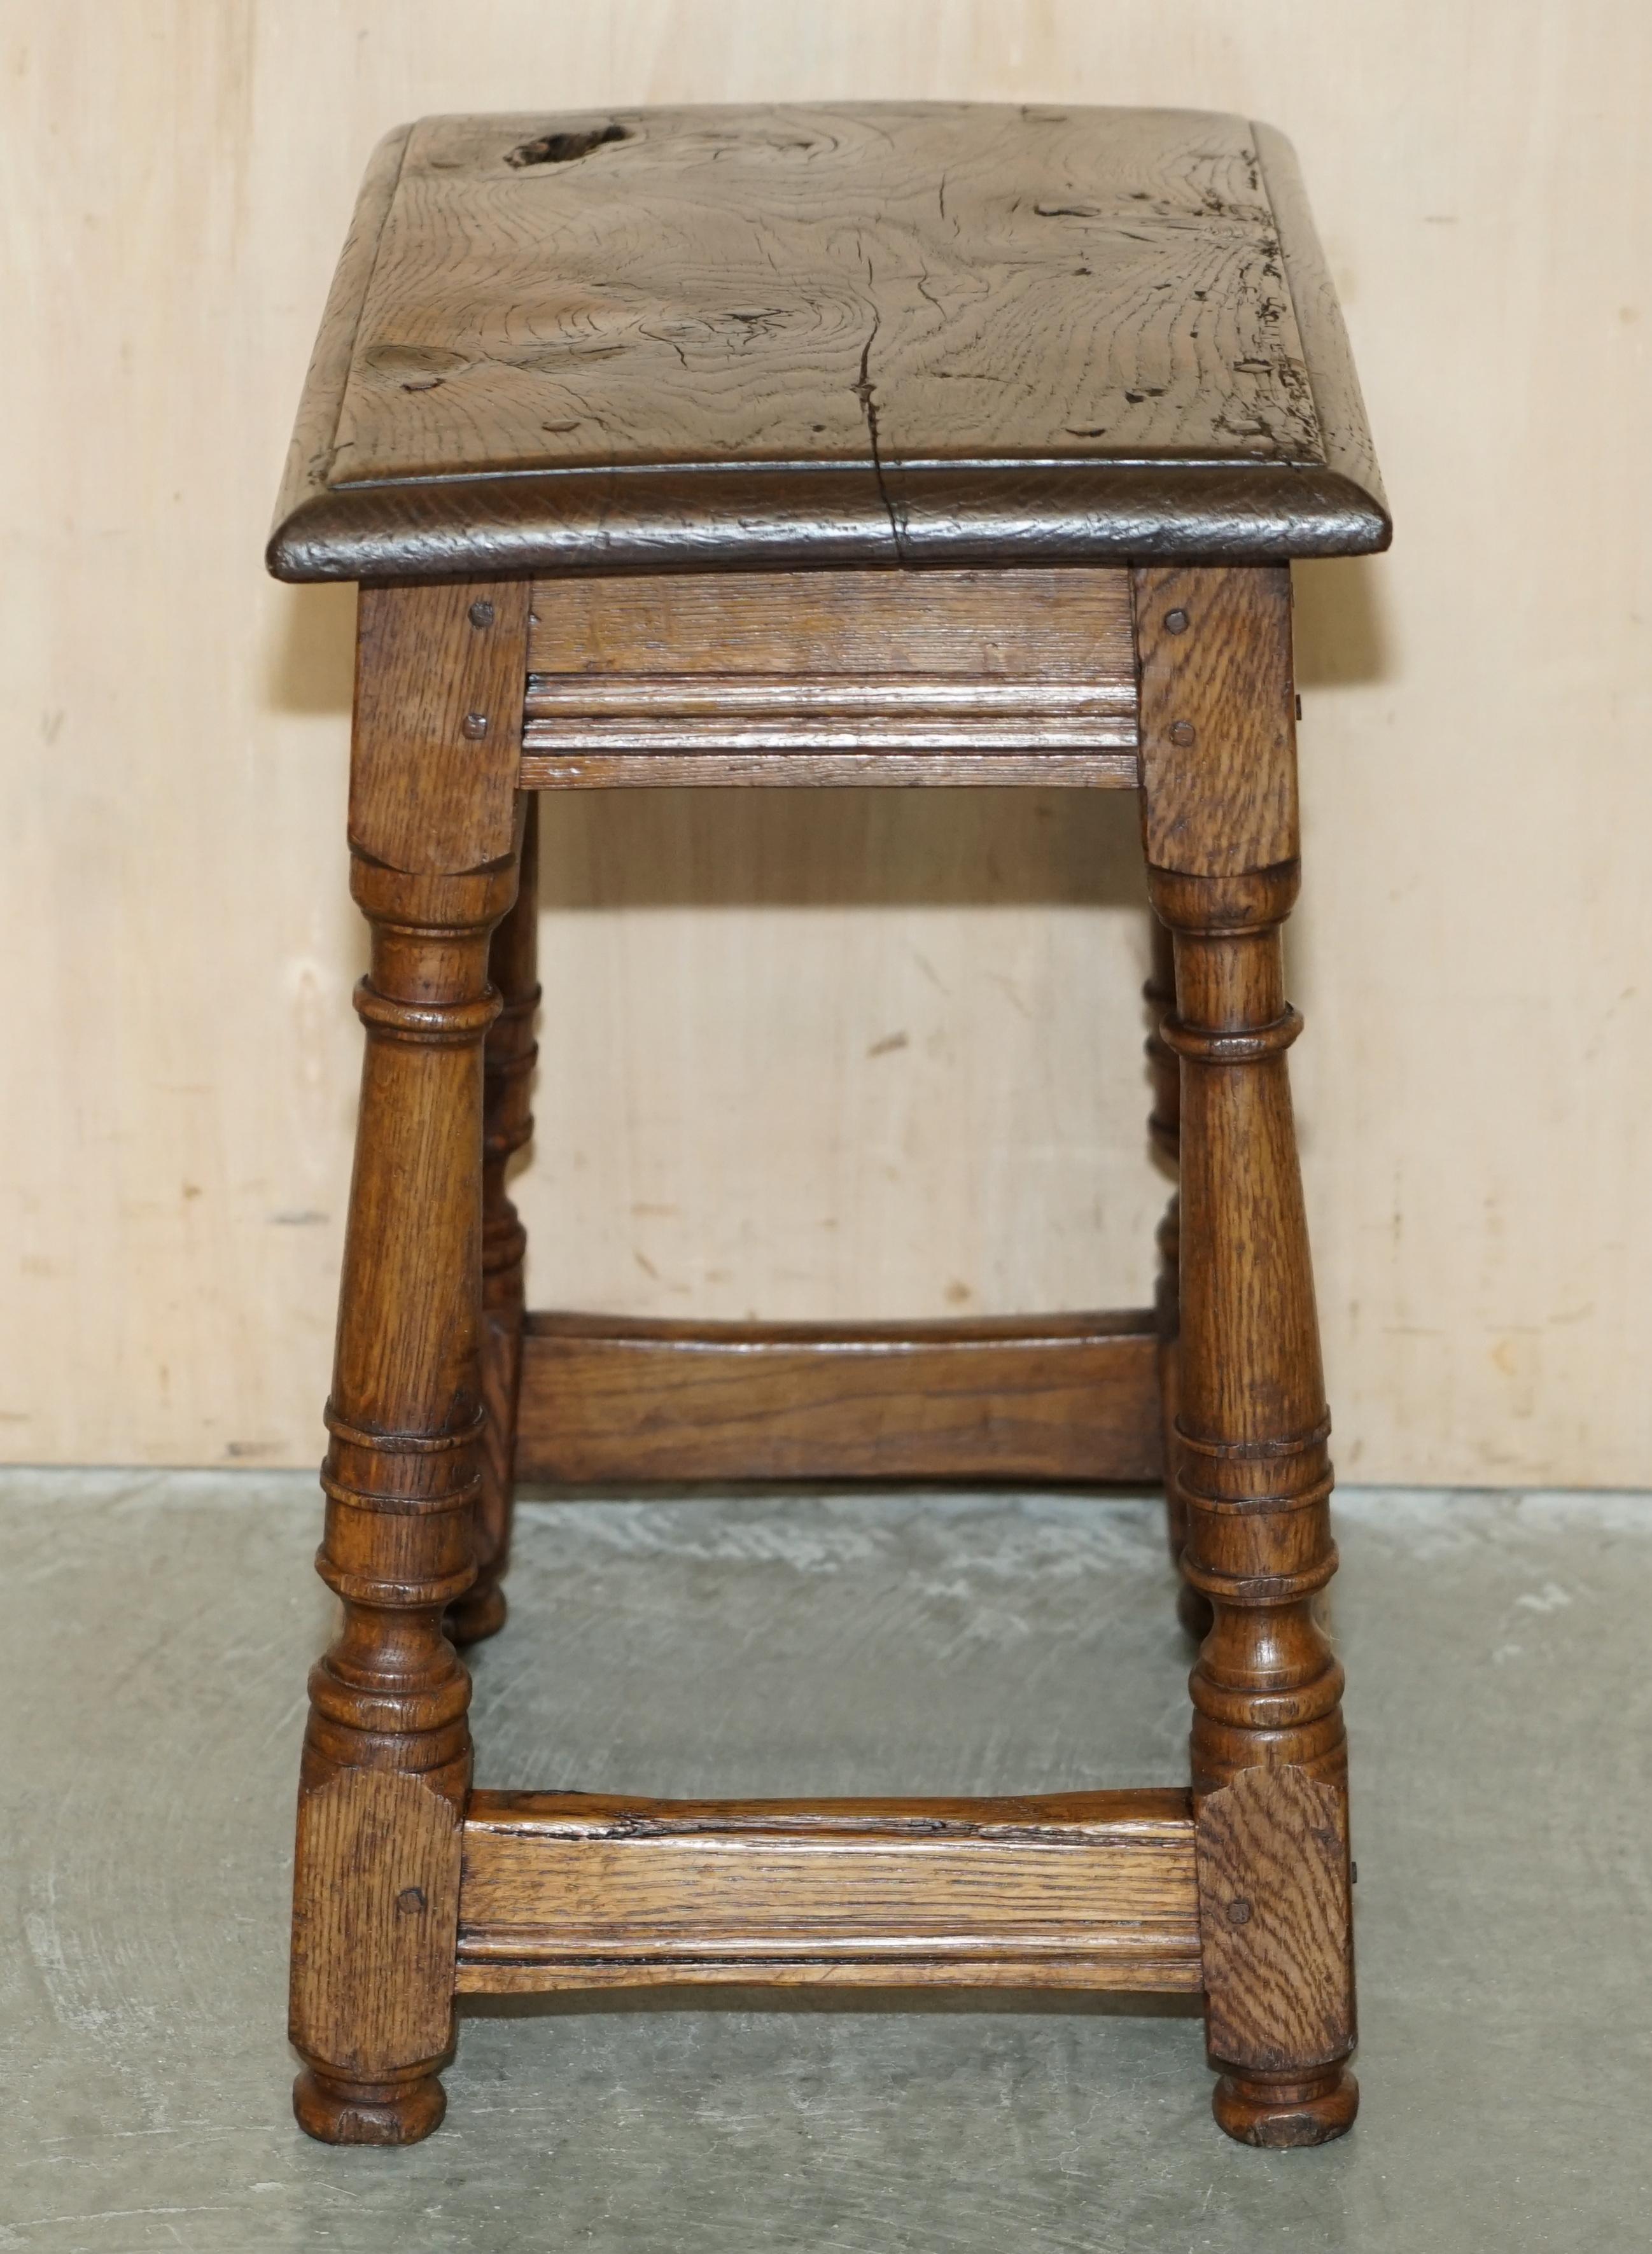 STUNNiNG HEAVILY BURRED OAK ANTIQUE 18TH CENTURY CIRCA 1780 JOINTED STOOL TABLE For Sale 13